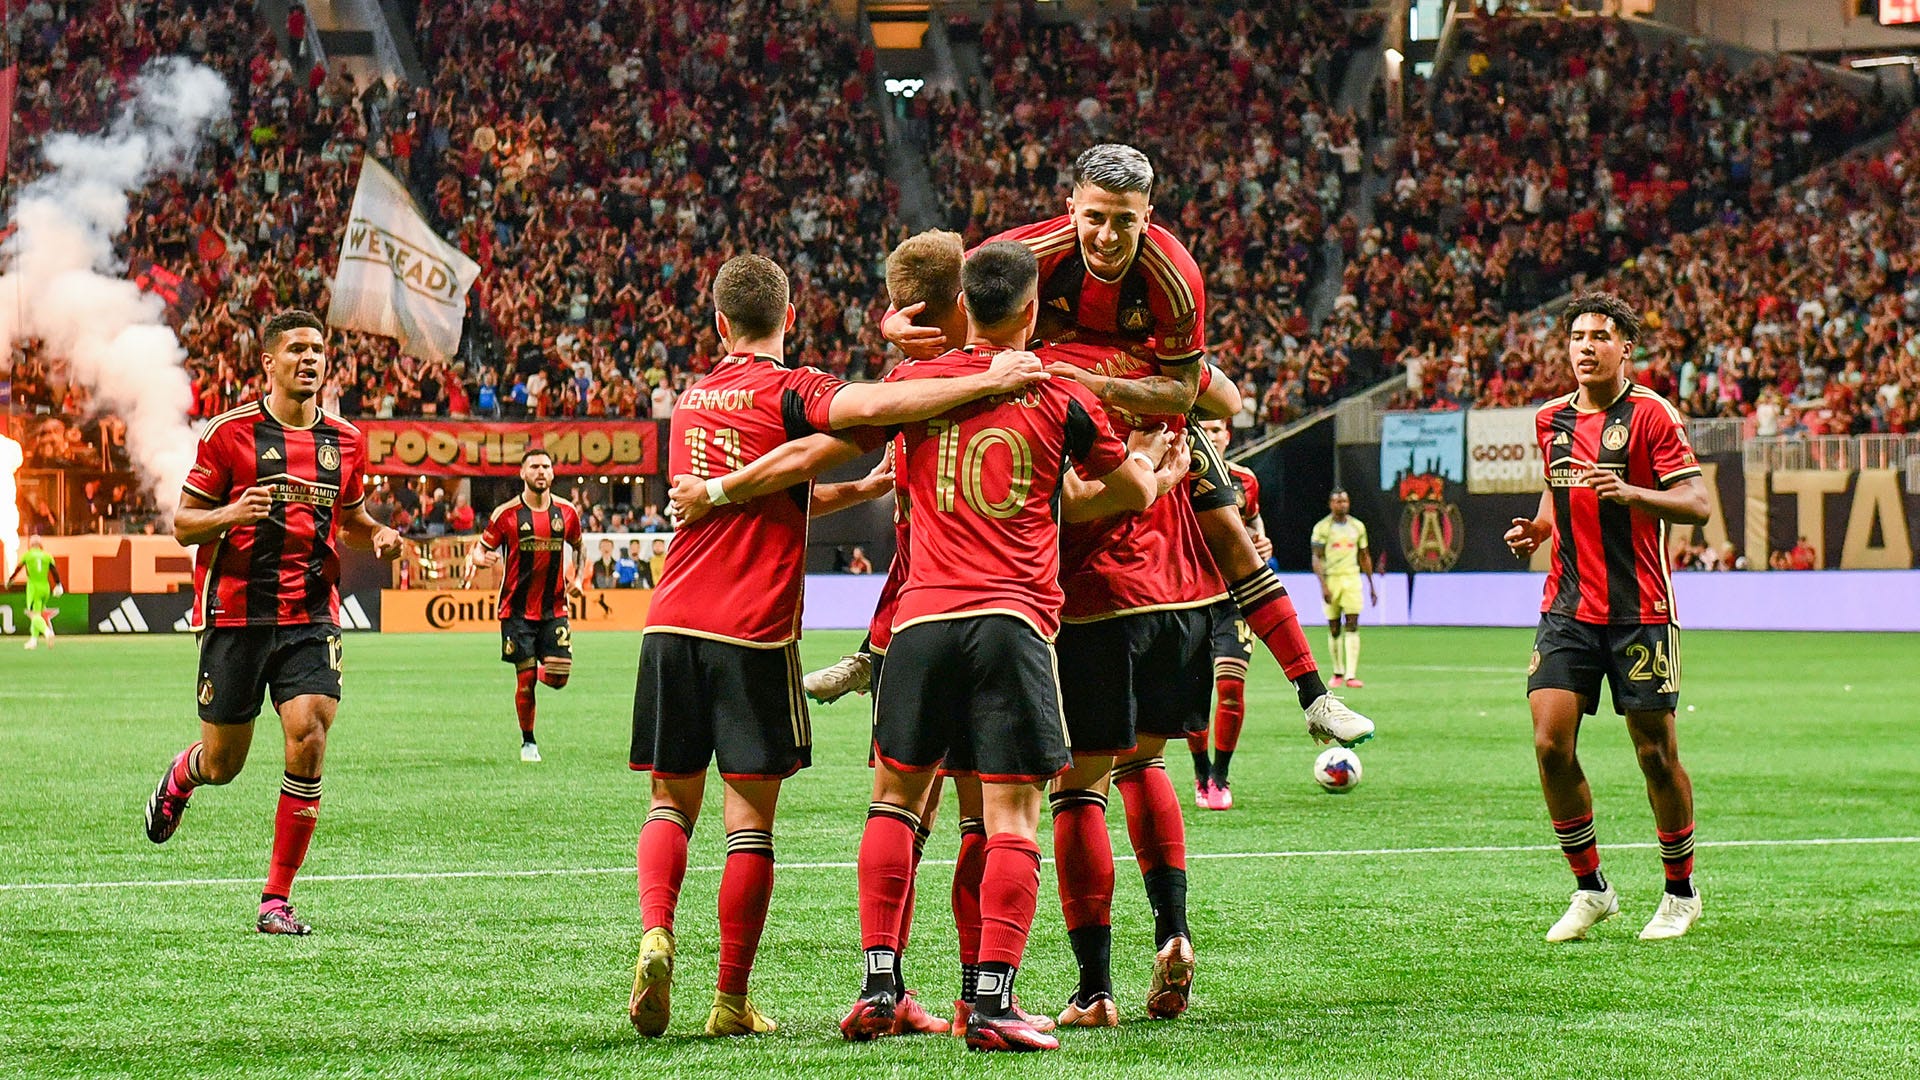 Atlanta United vs Charlotte: Where to watch the match online, live stream, TV channels & kick-off time | Goal.com US